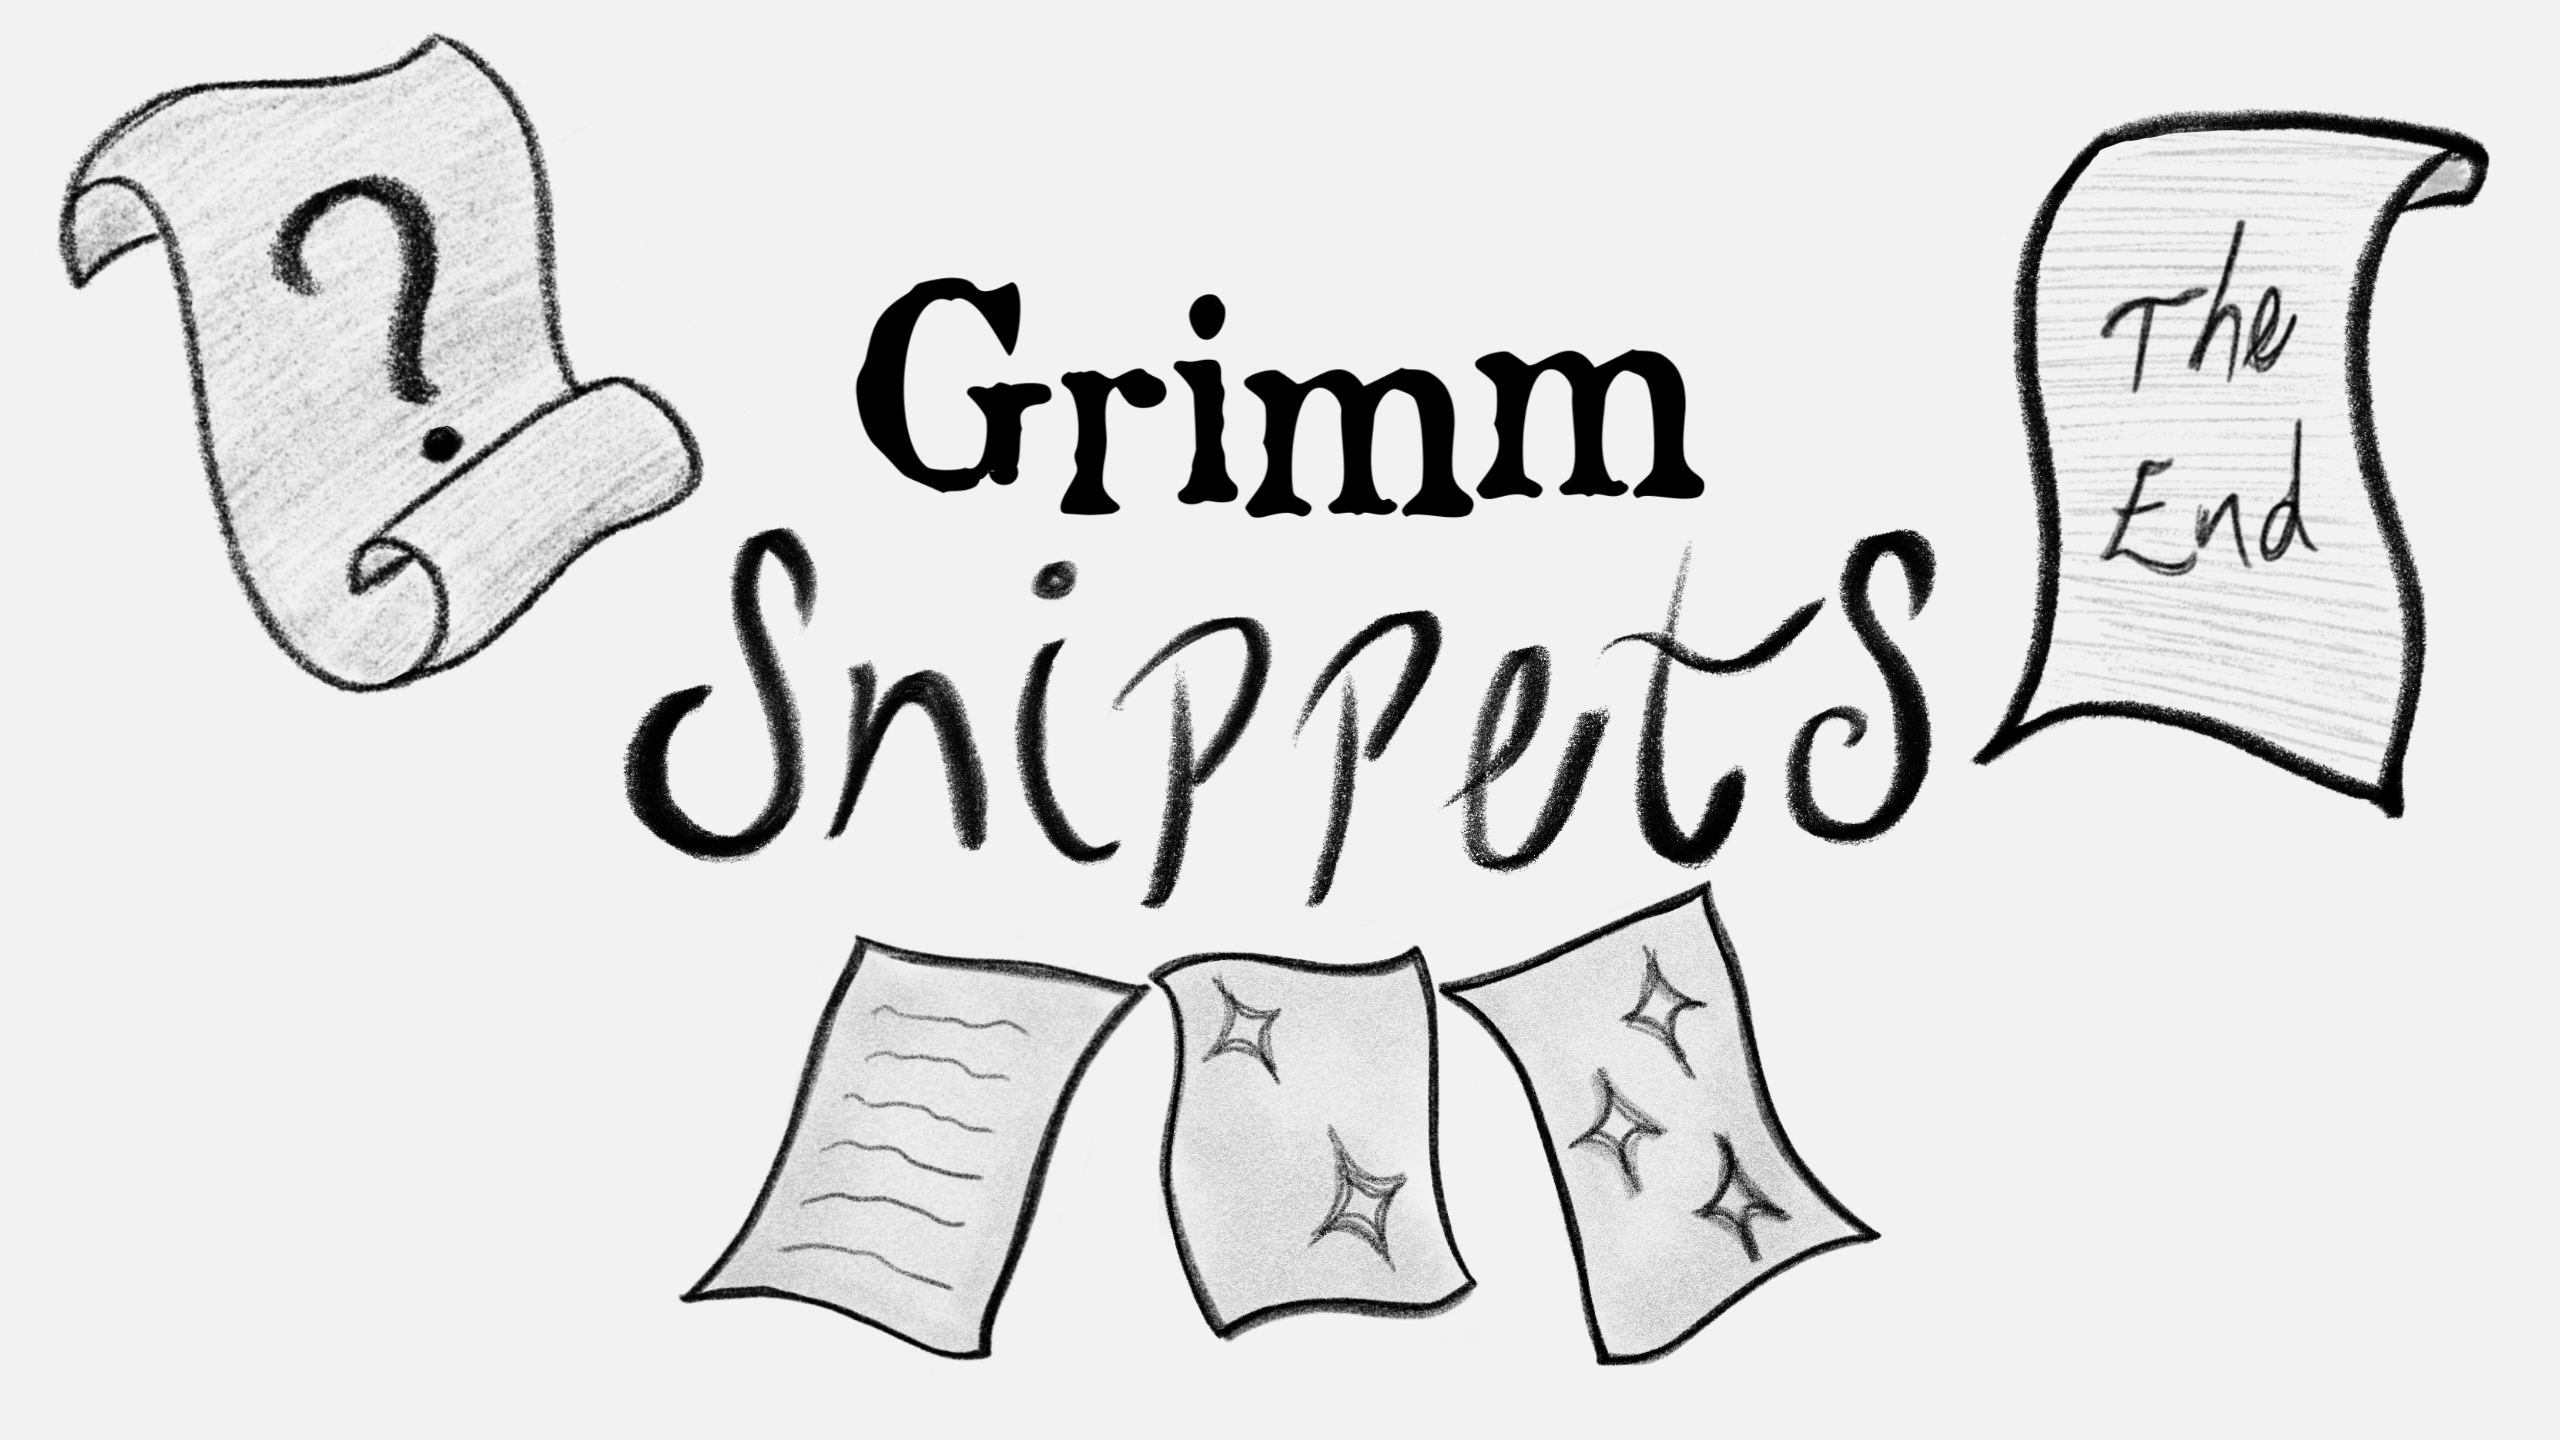 The words "Grimm Snippets" surrounded by illustrated scrolls.